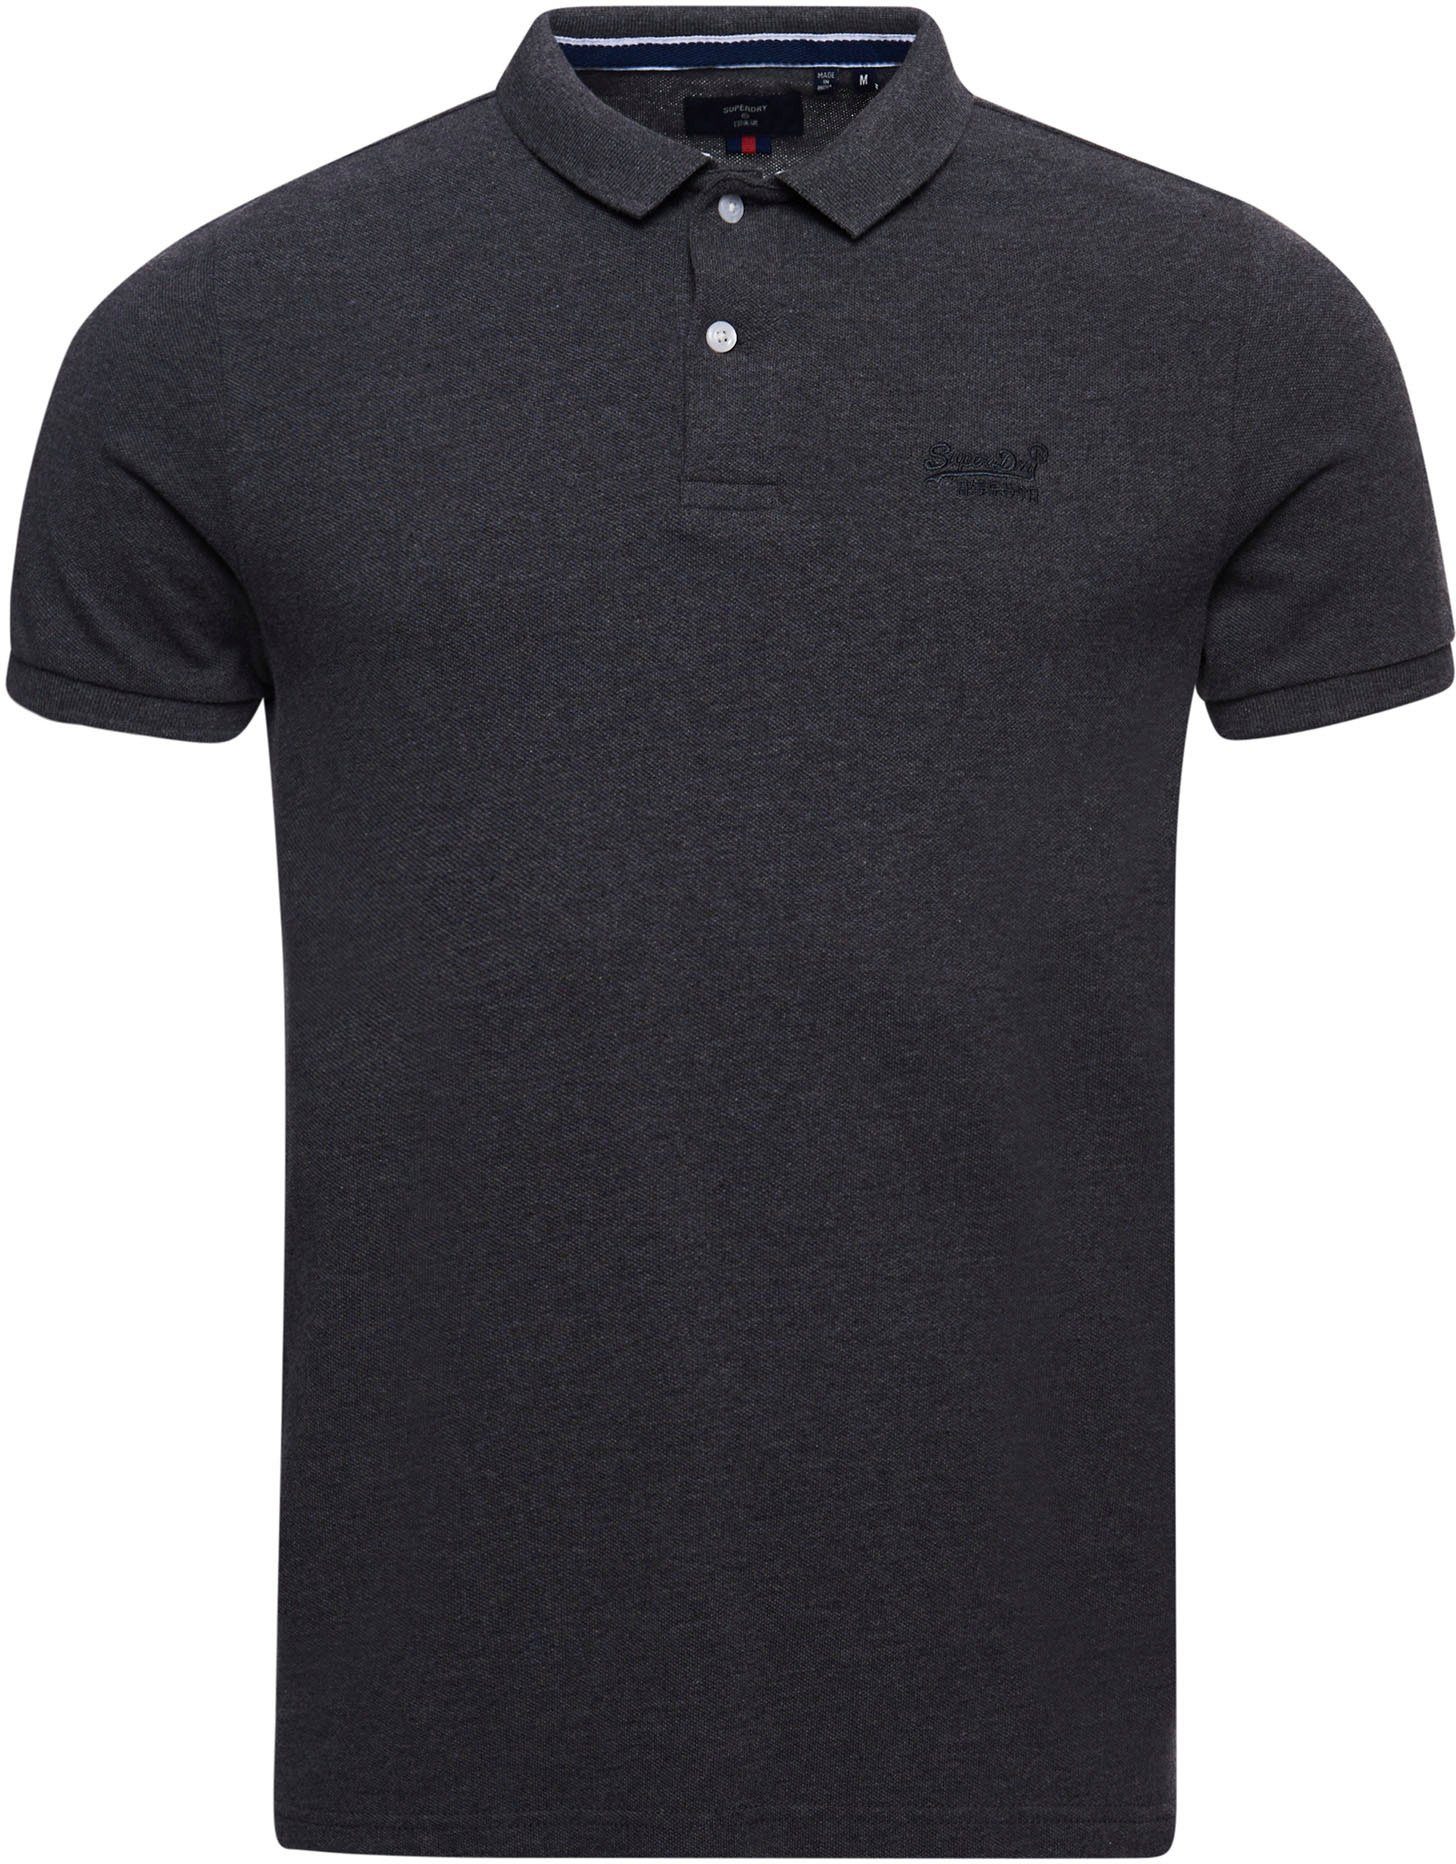 Poloshirt PIQUE rich Superdry POLO CLASSIC marl charcoal